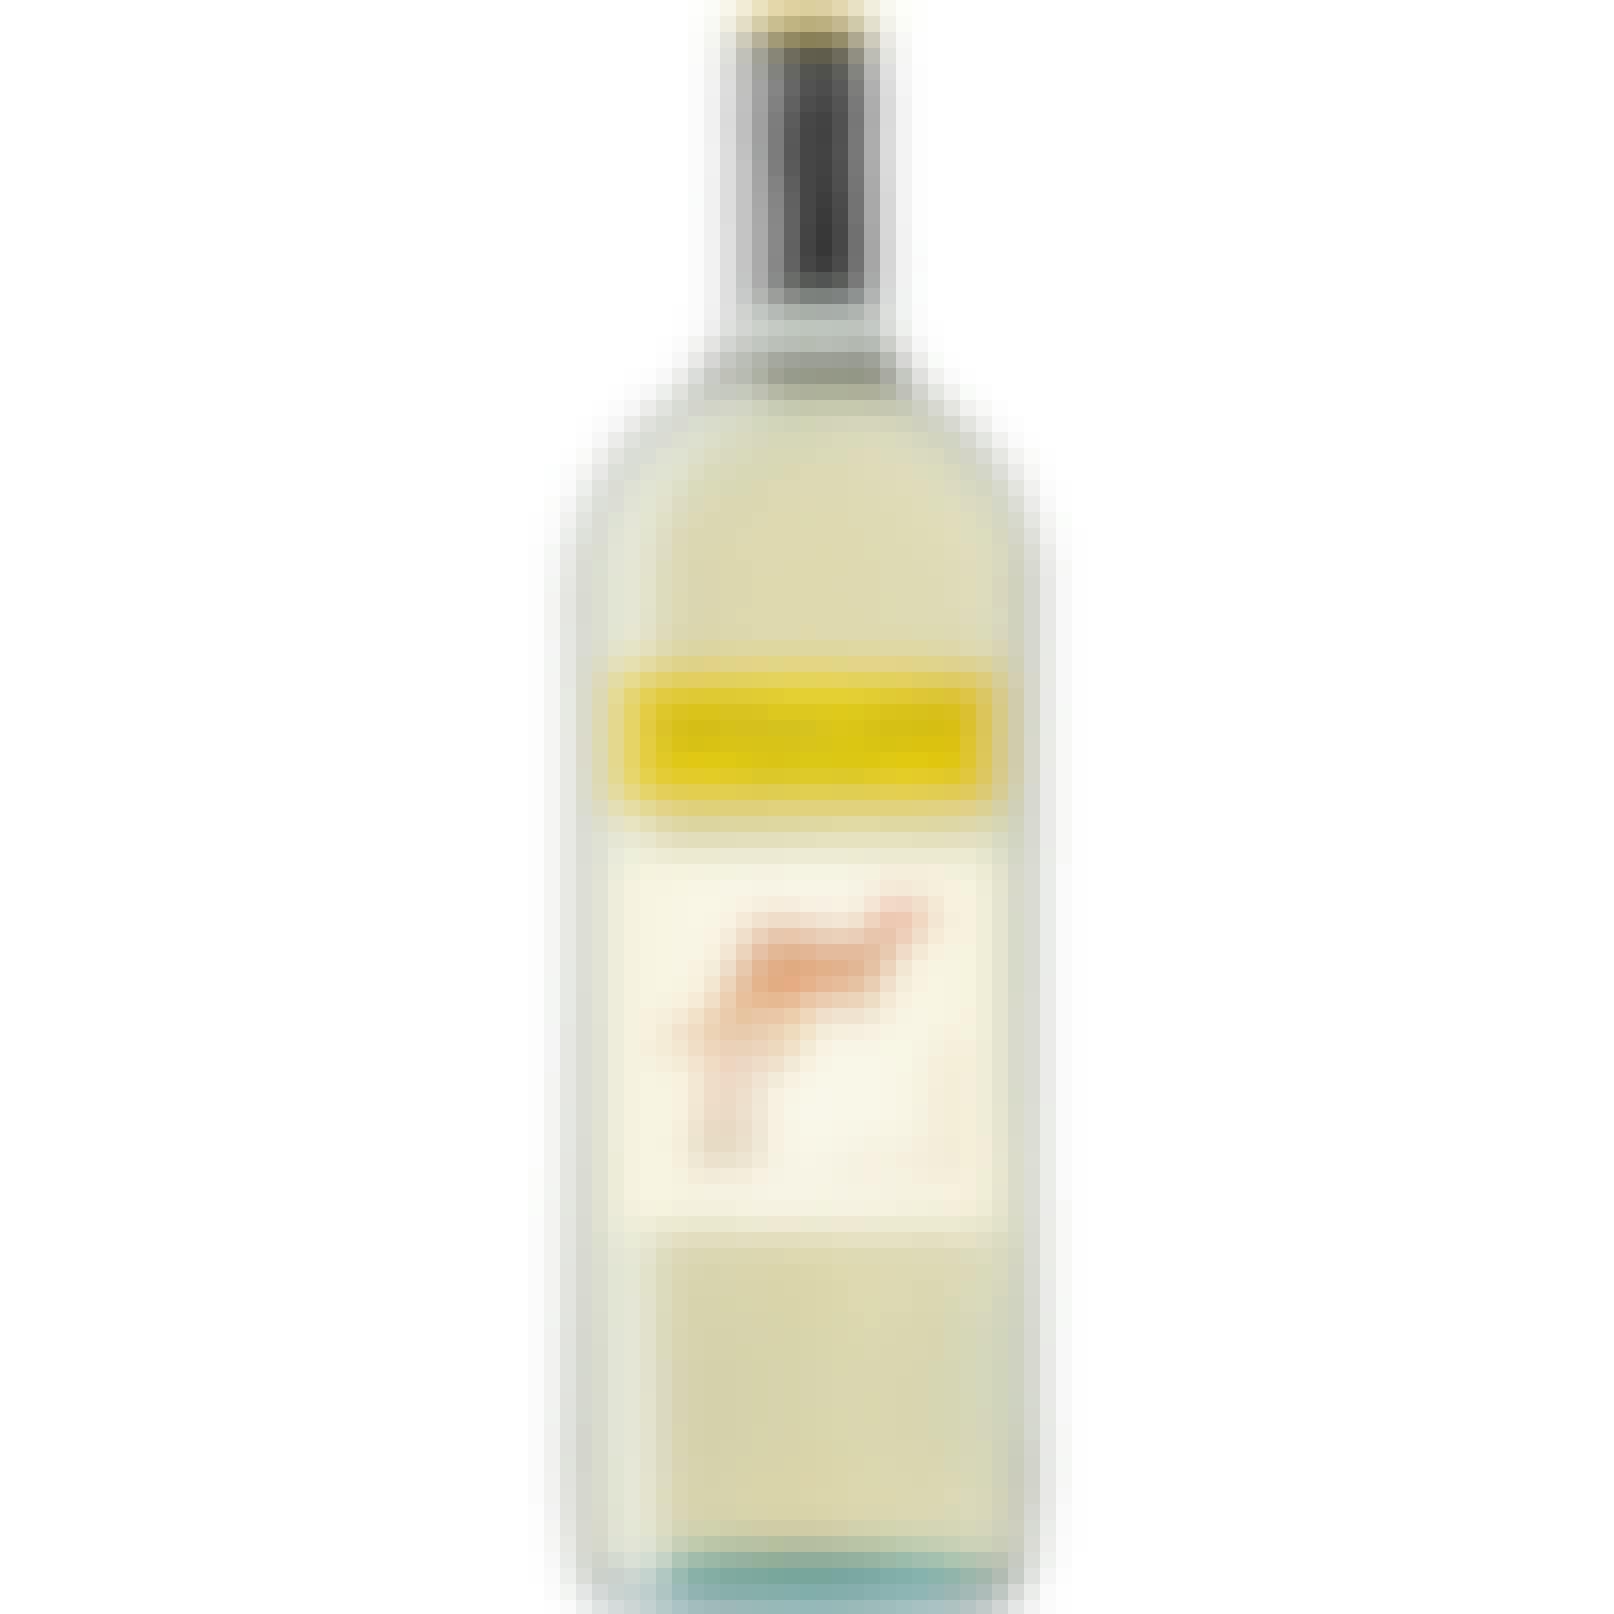 Yellow Tail Riesling 1.5L